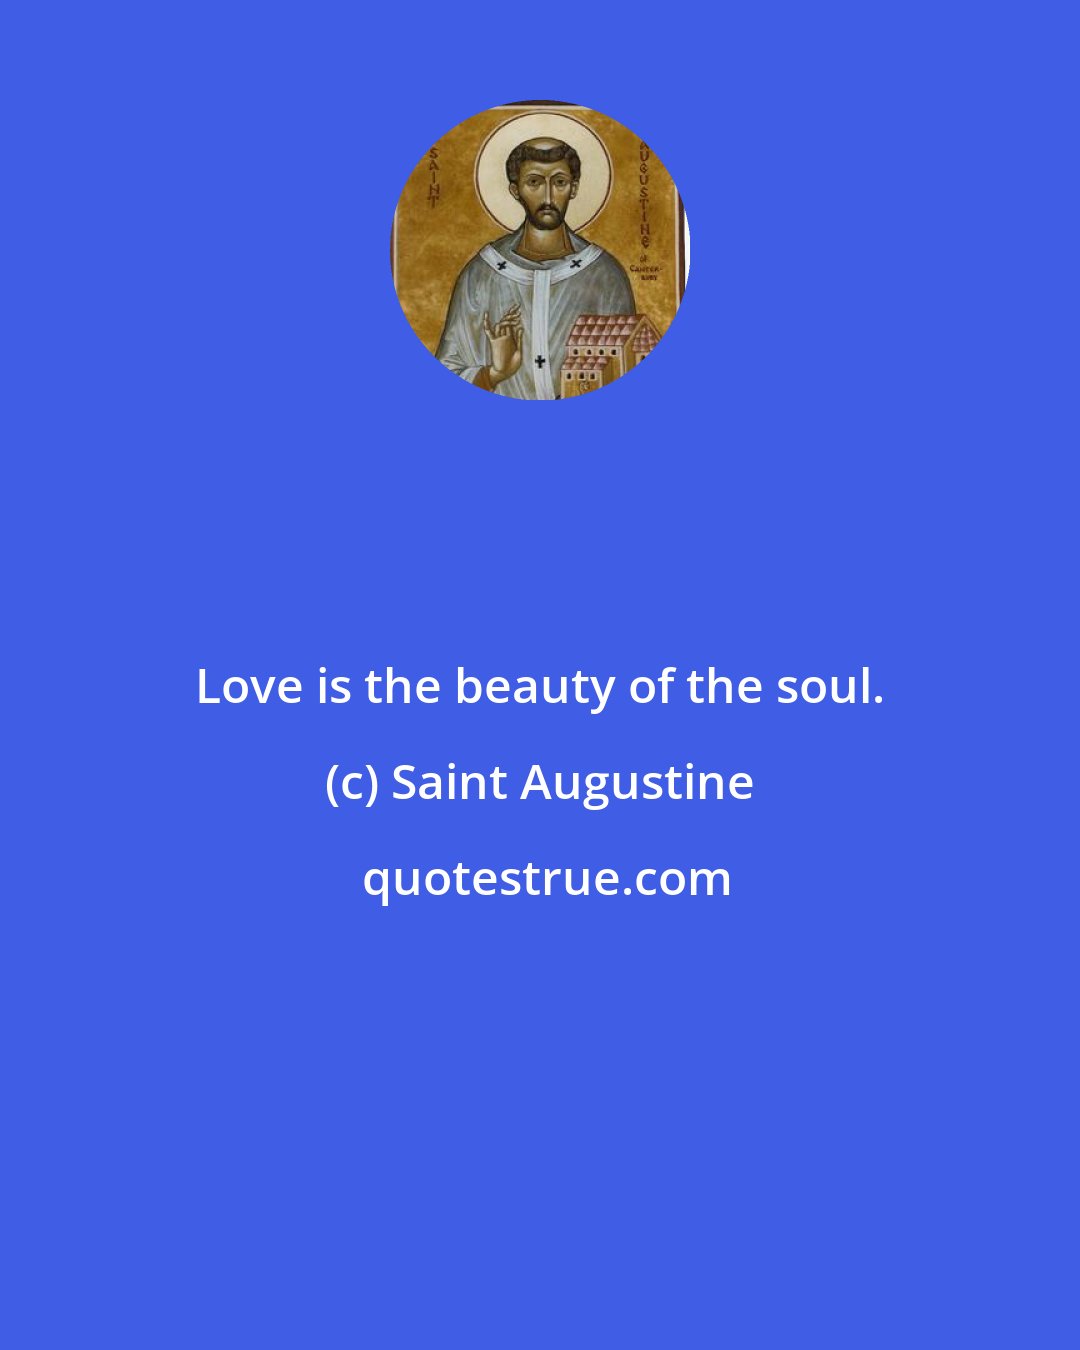 Saint Augustine: Love is the beauty of the soul.